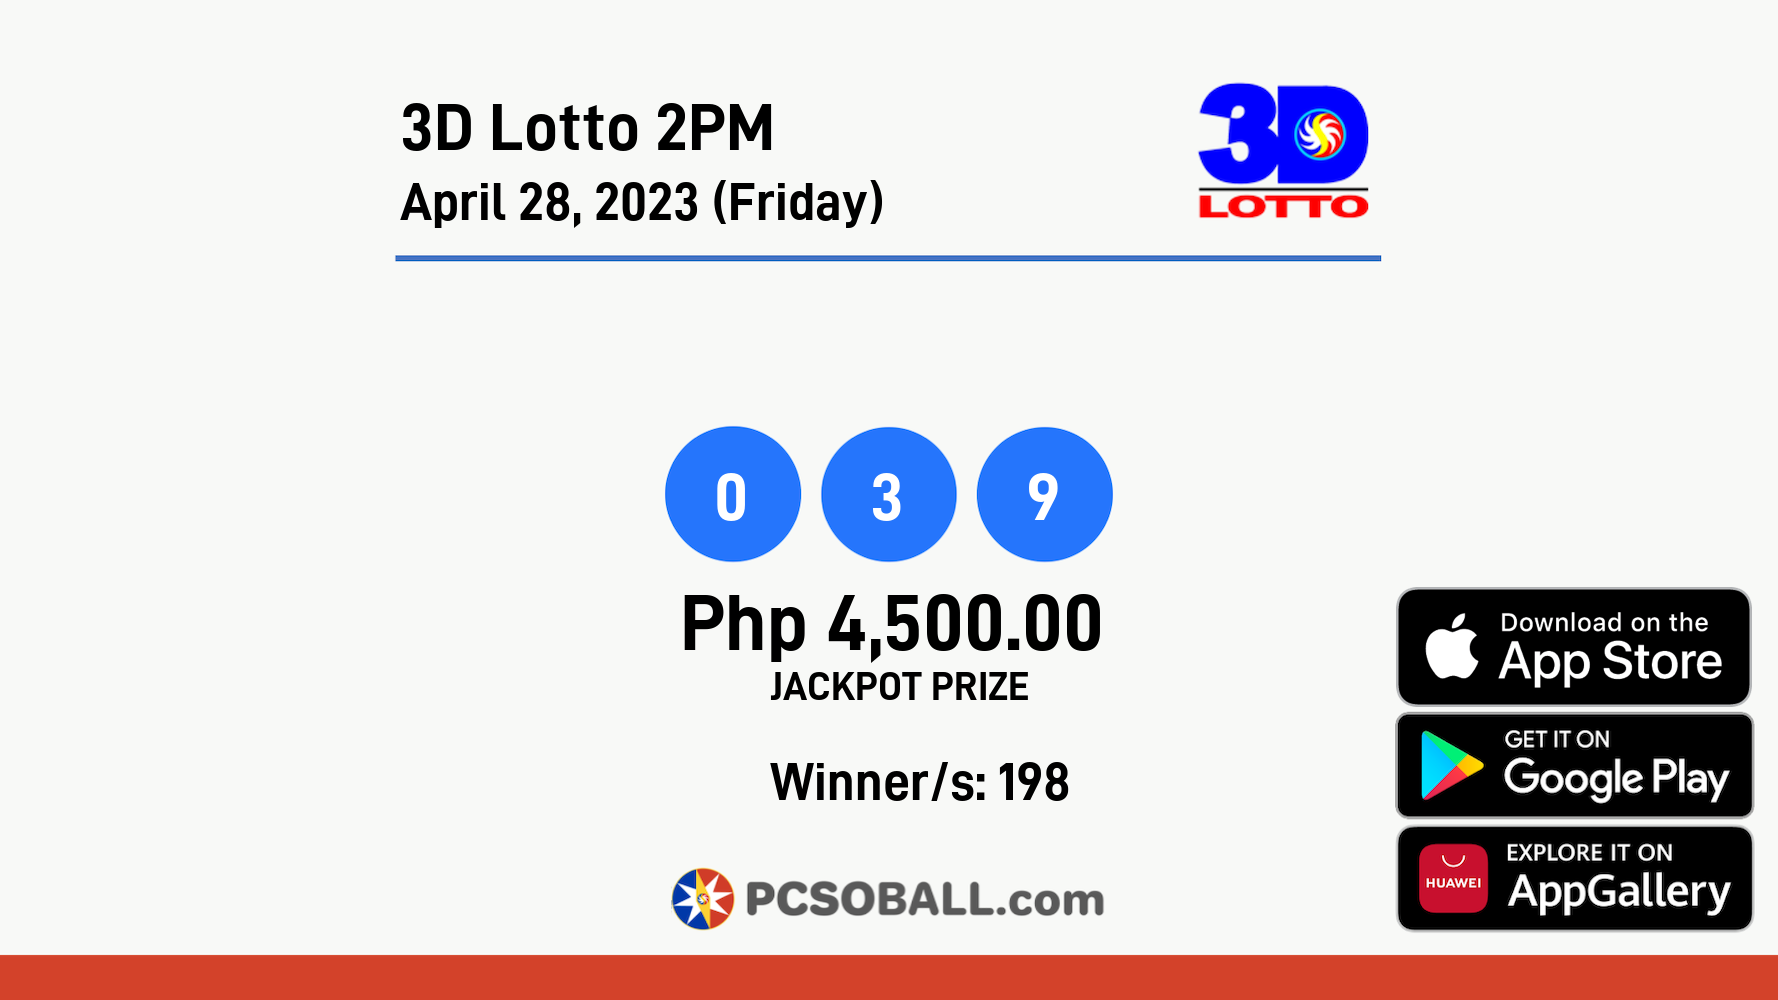 3D Lotto 2PM April 28, 2023 (Friday) Result